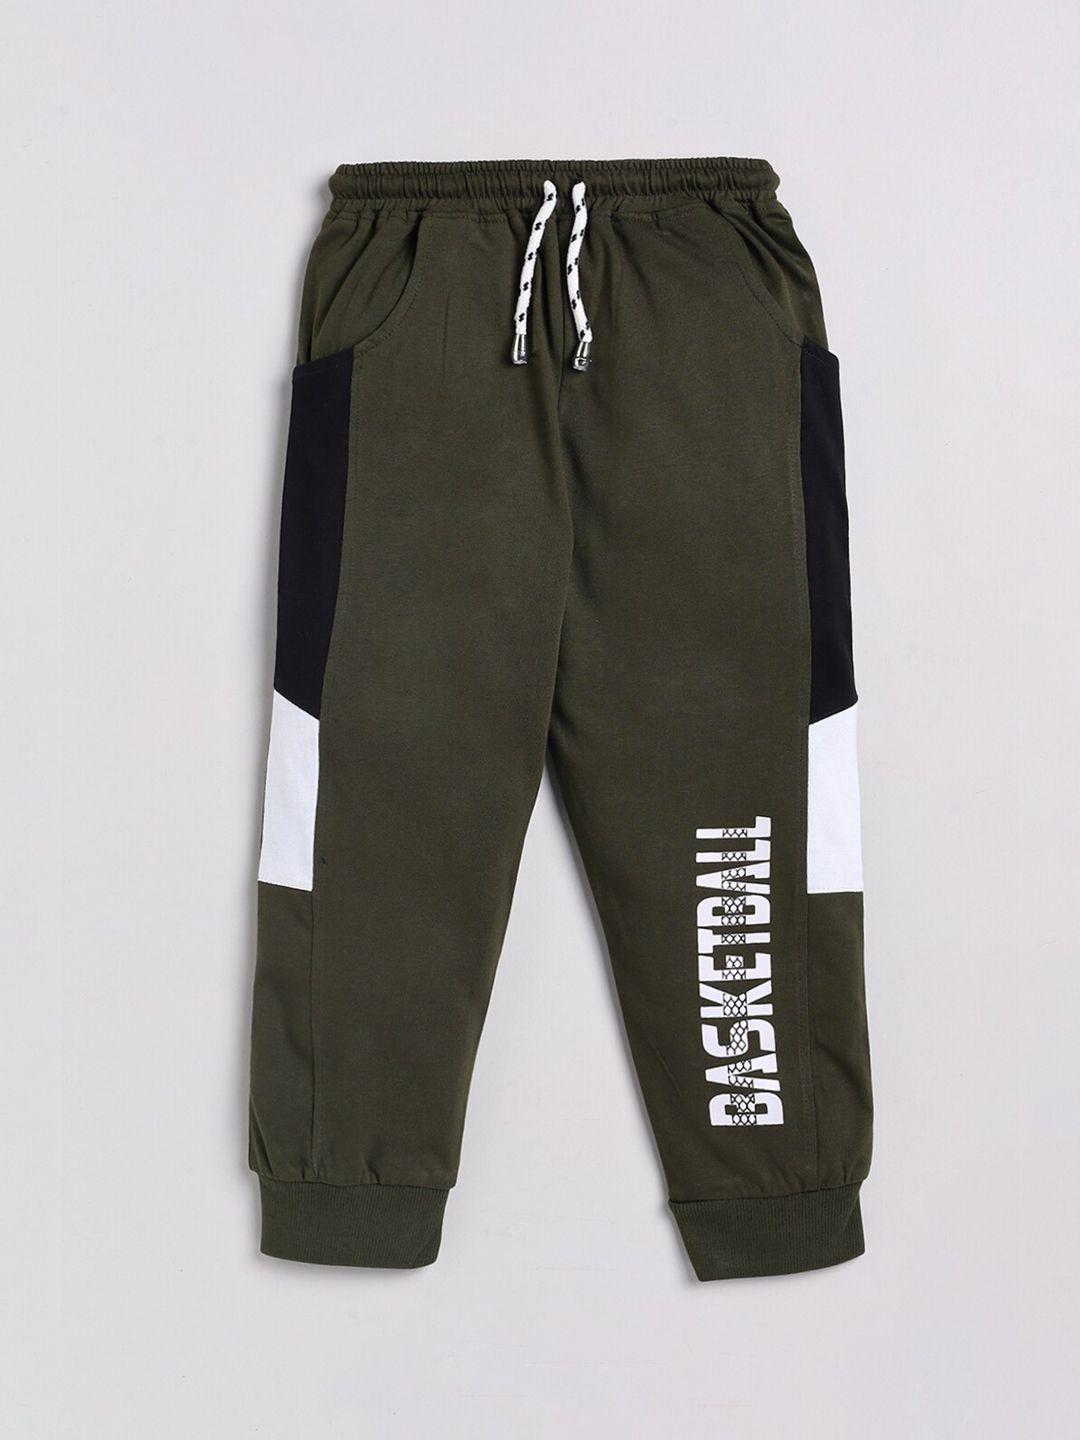 nottie planet boys olive green & white printed cotton  joggers